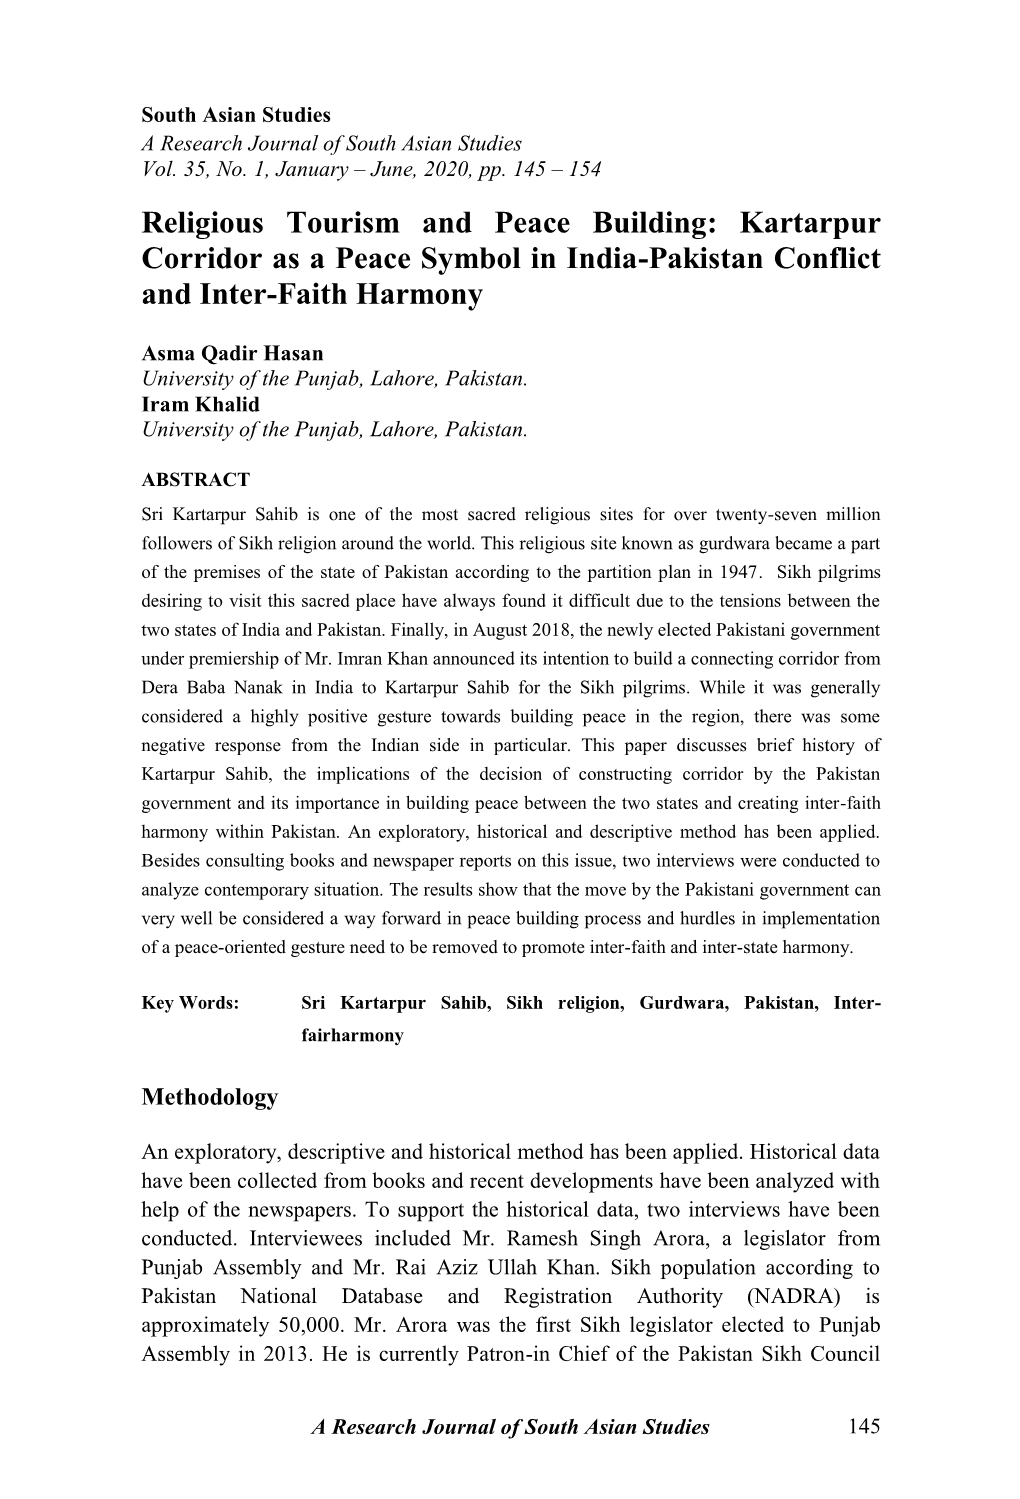 Religious Tourism and Peace Building: Kartarpur Corridor As a Peace Symbol in India-Pakistan Conflict and Inter-Faith Harmony